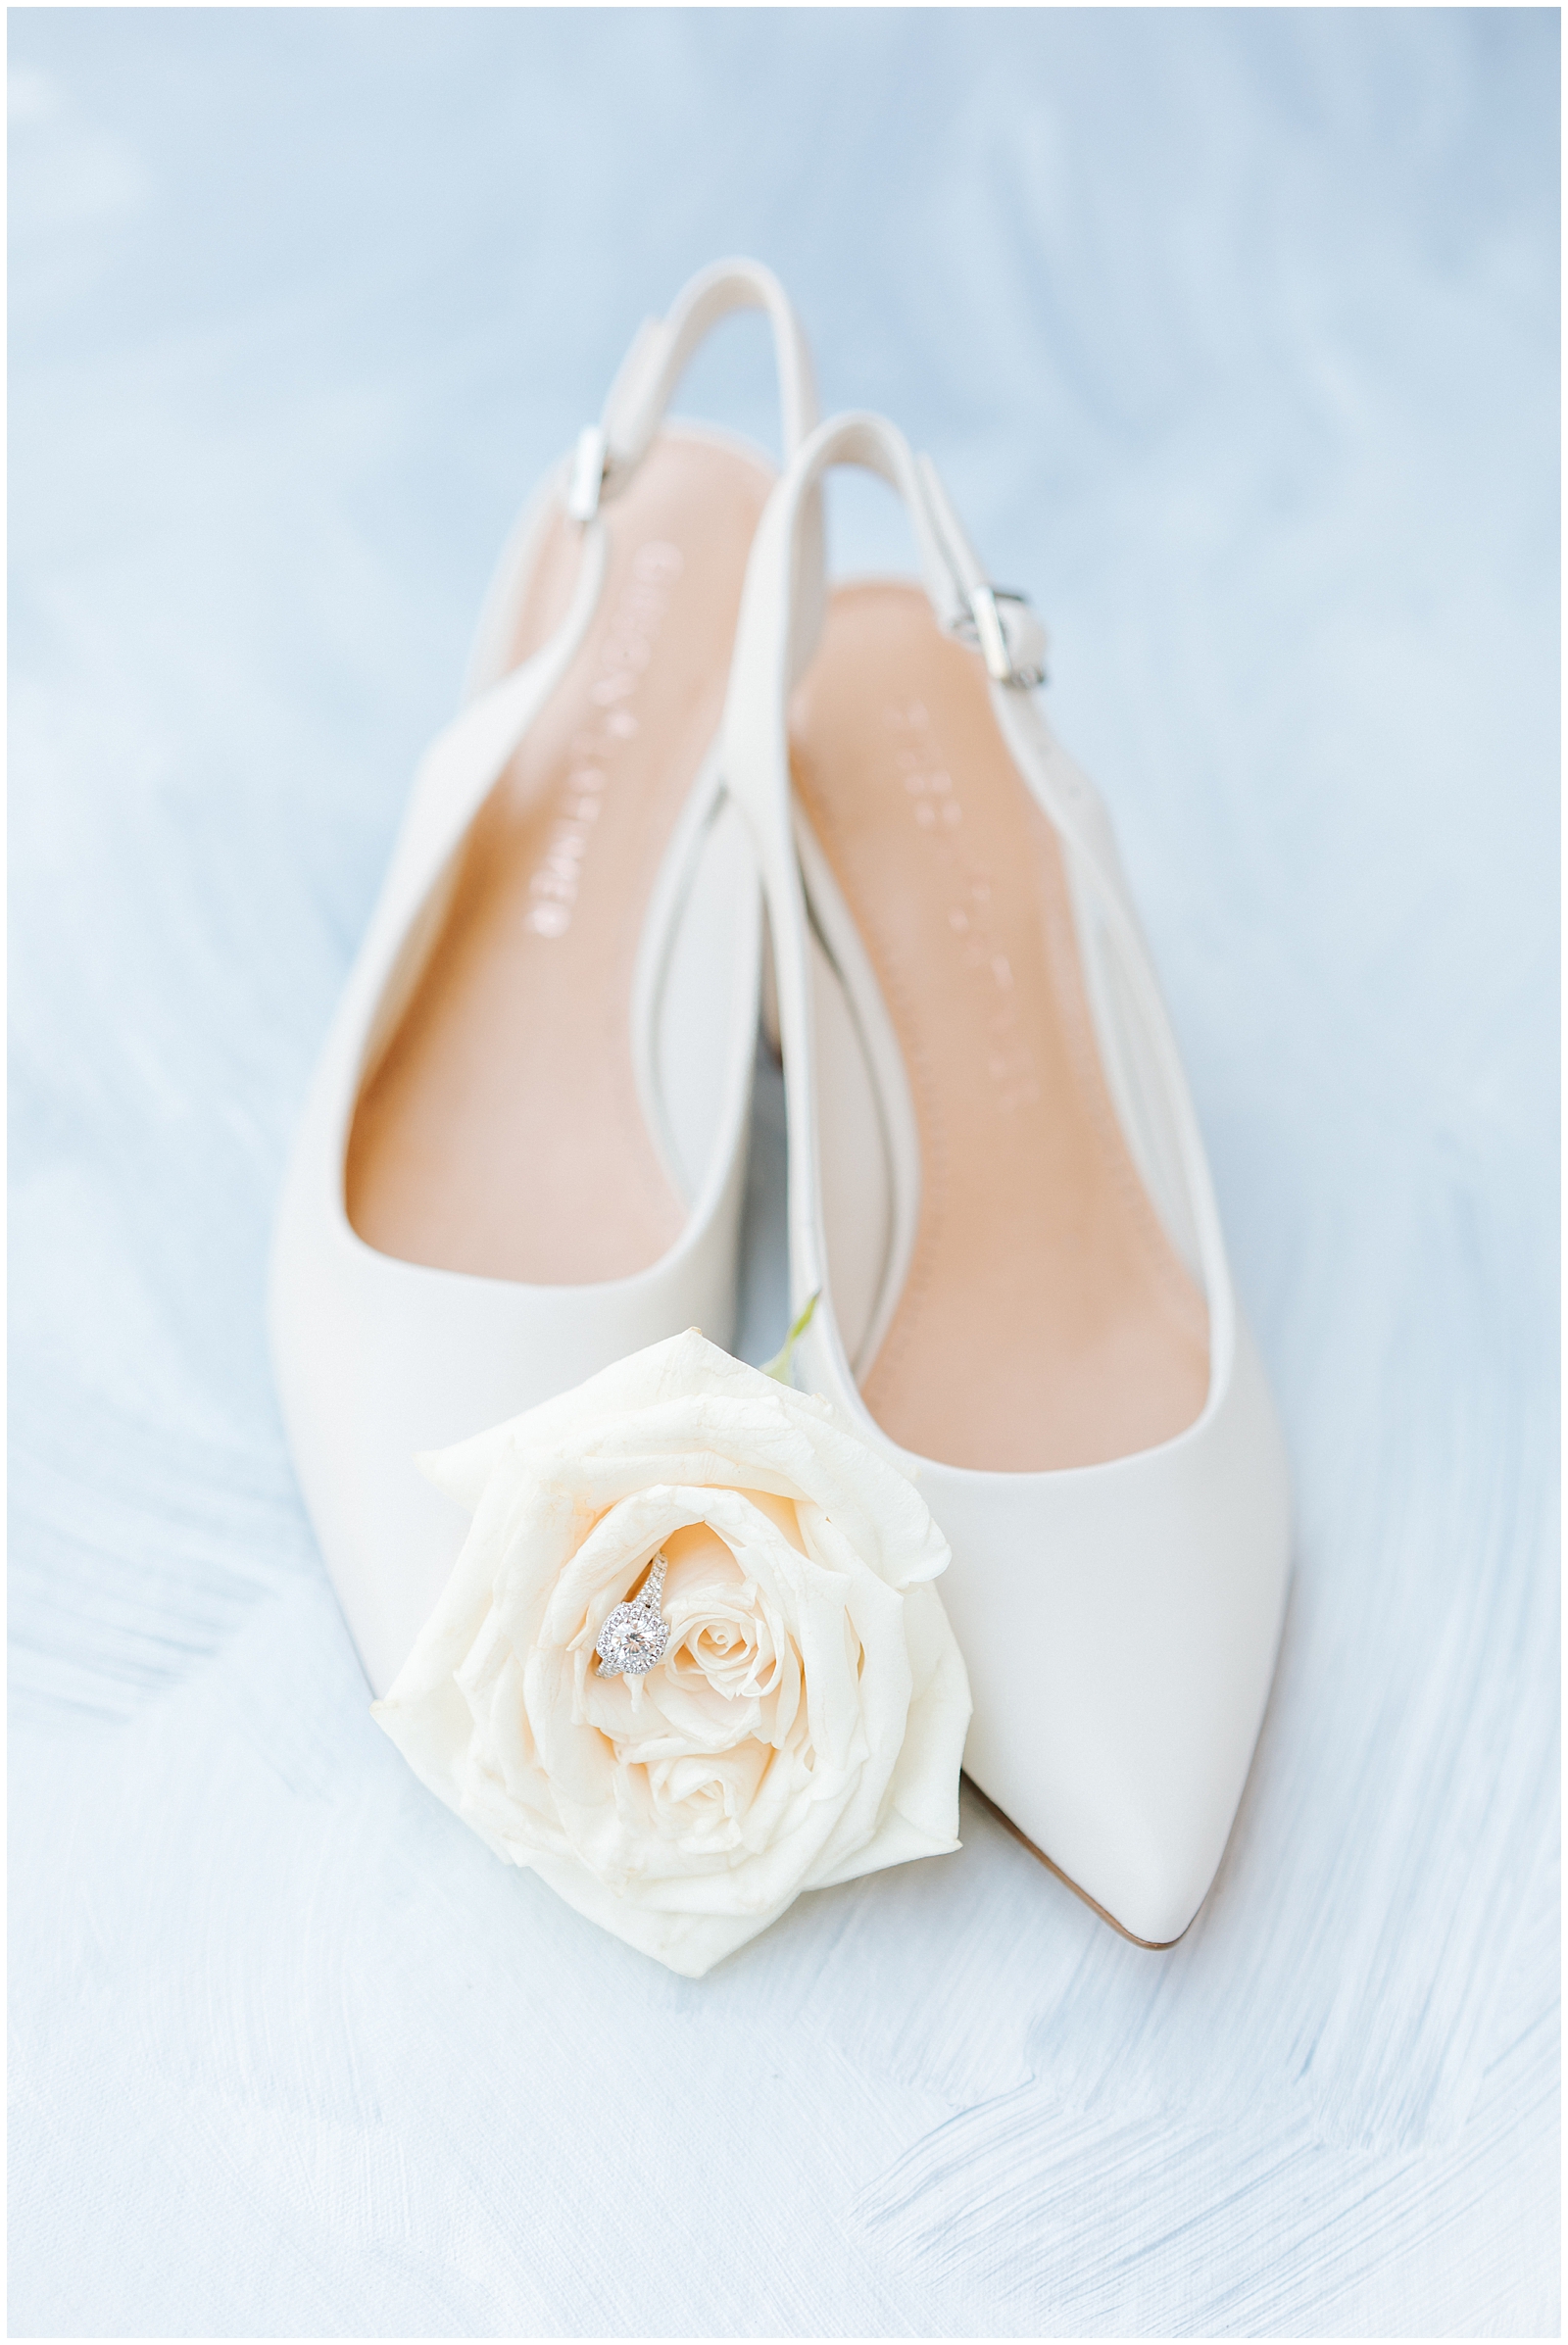 Nude heels with white rose and ring detail